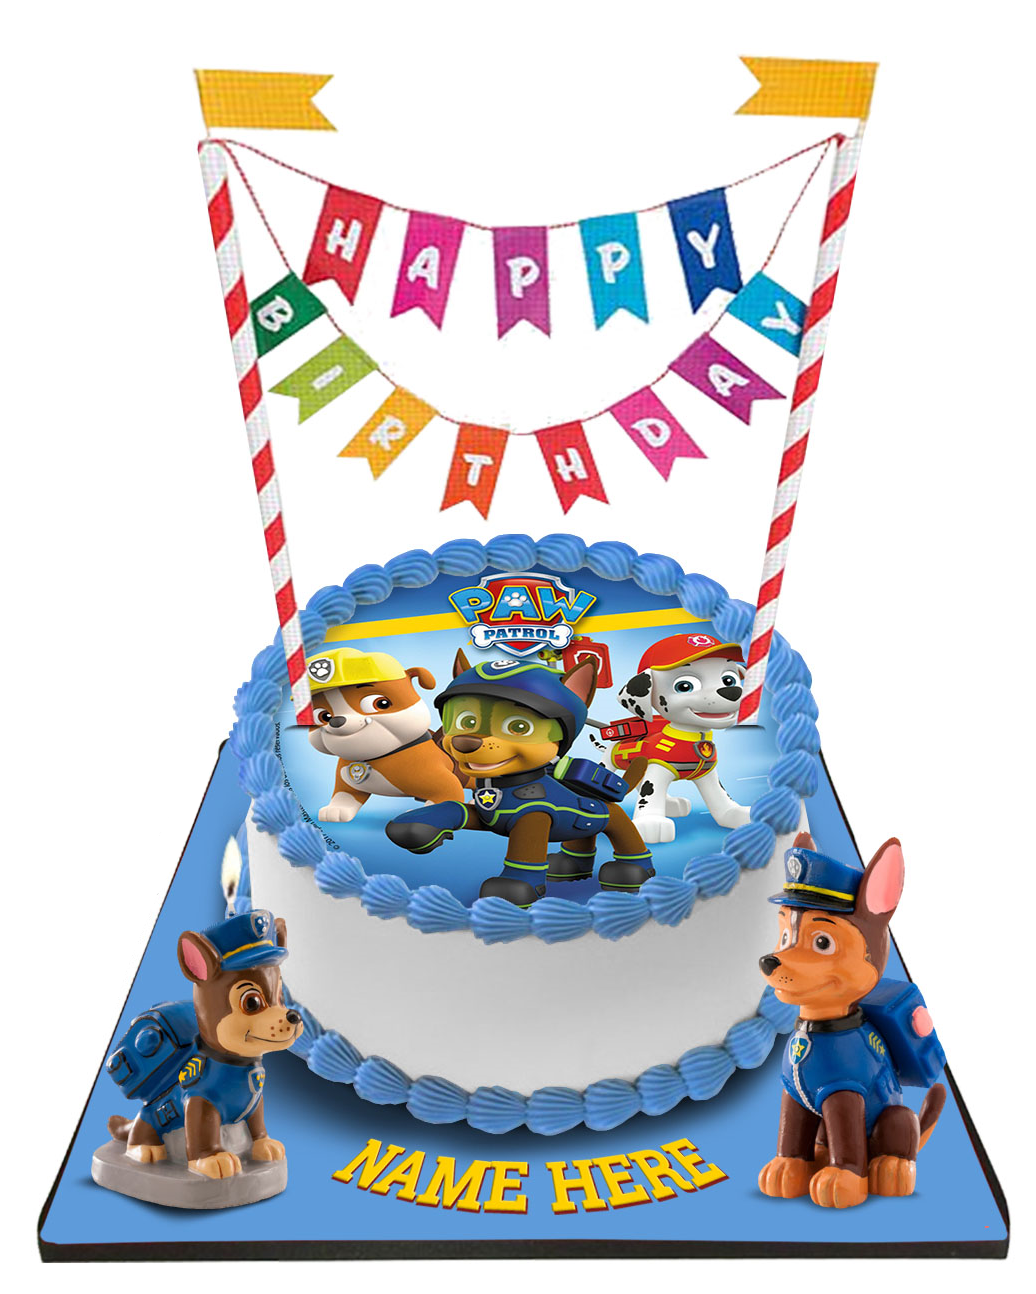 Paw Patrol Cake with Happy Birthday Bunting &Topper